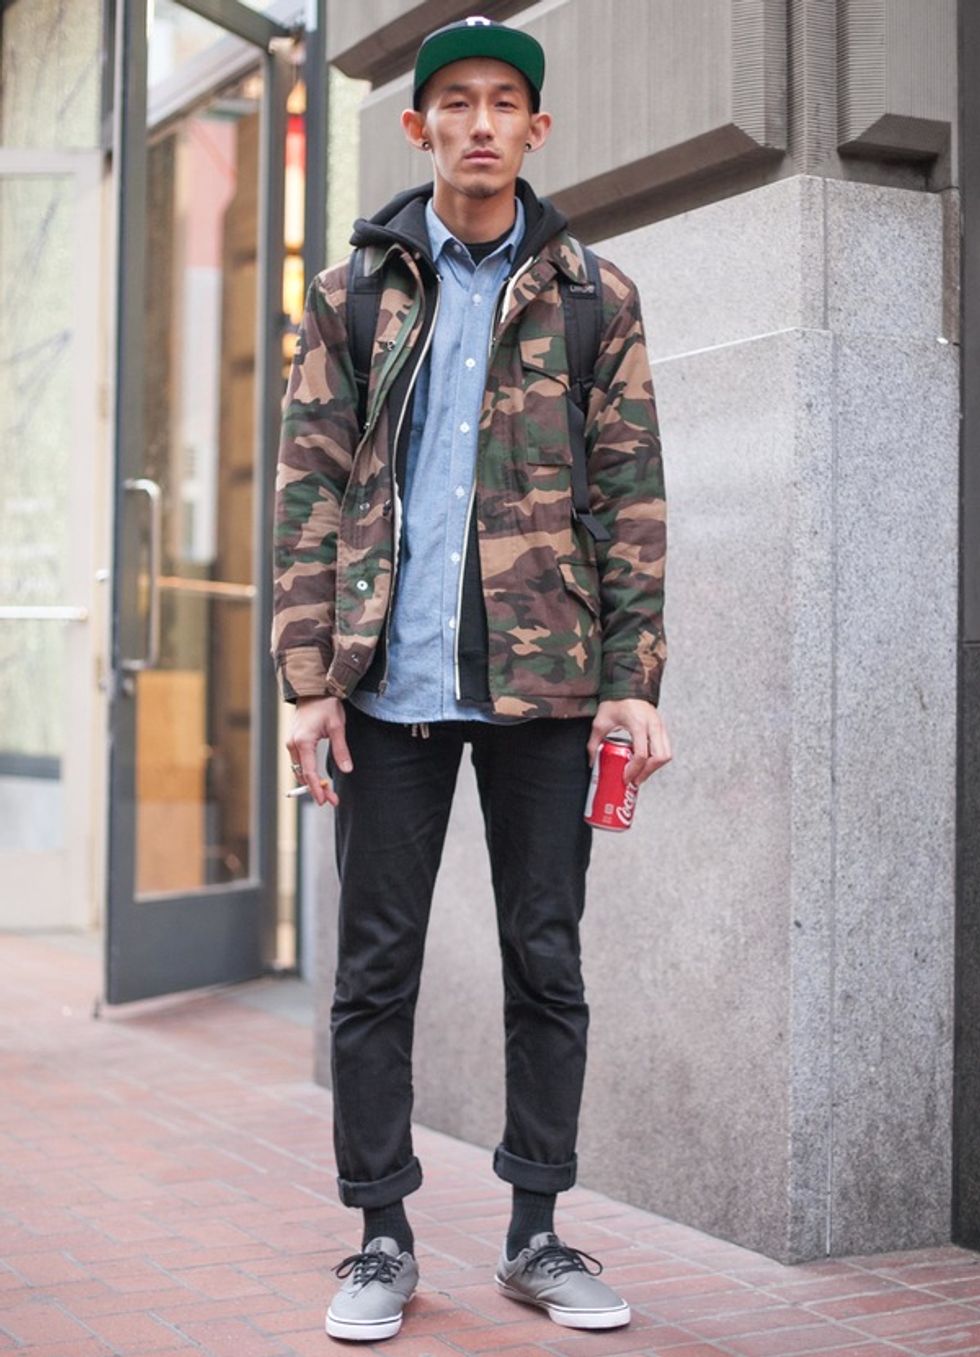 Street Style Report: A Modern Japanese Skater, in Union Square